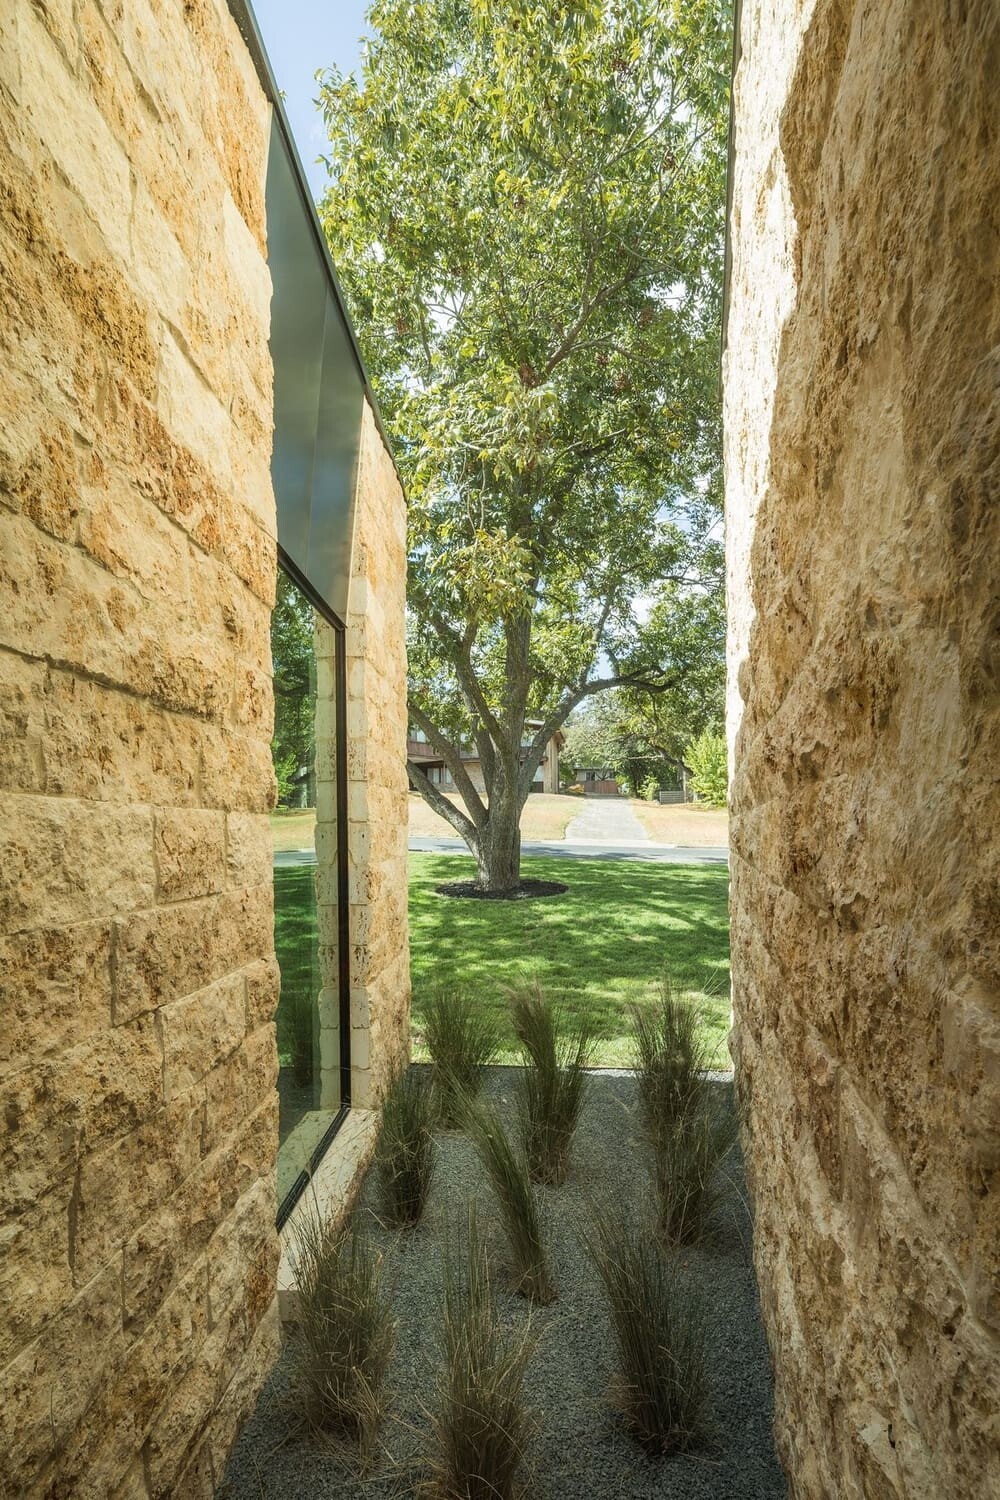 Modern House in Austin Designed as a Grouping of Small Intimate Stone Pavilions